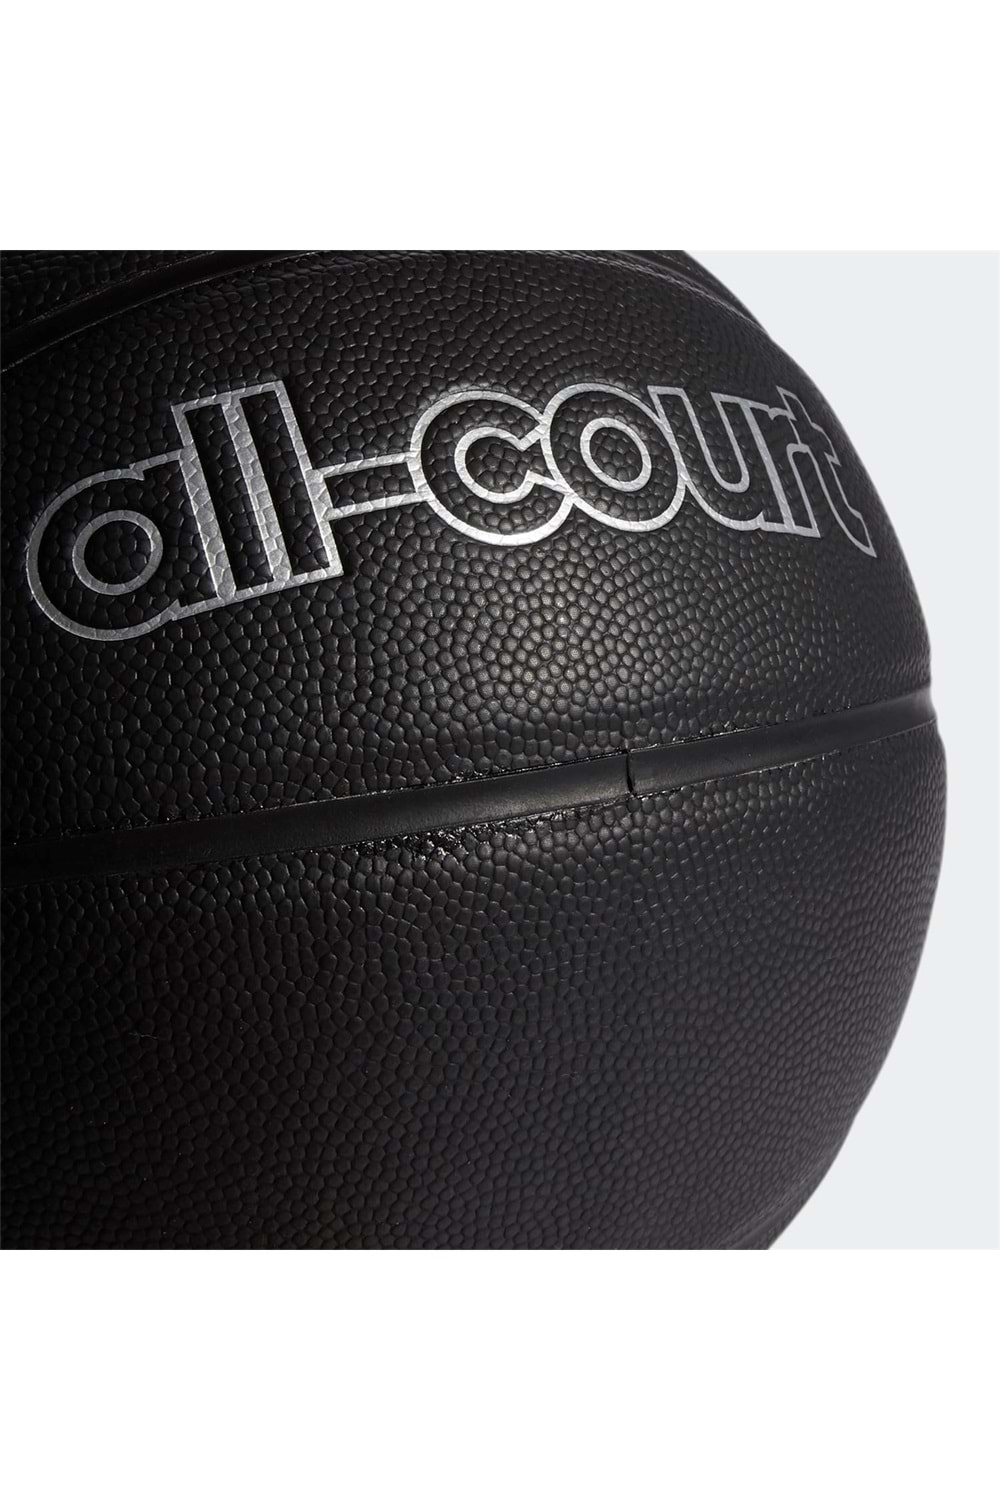 All Court